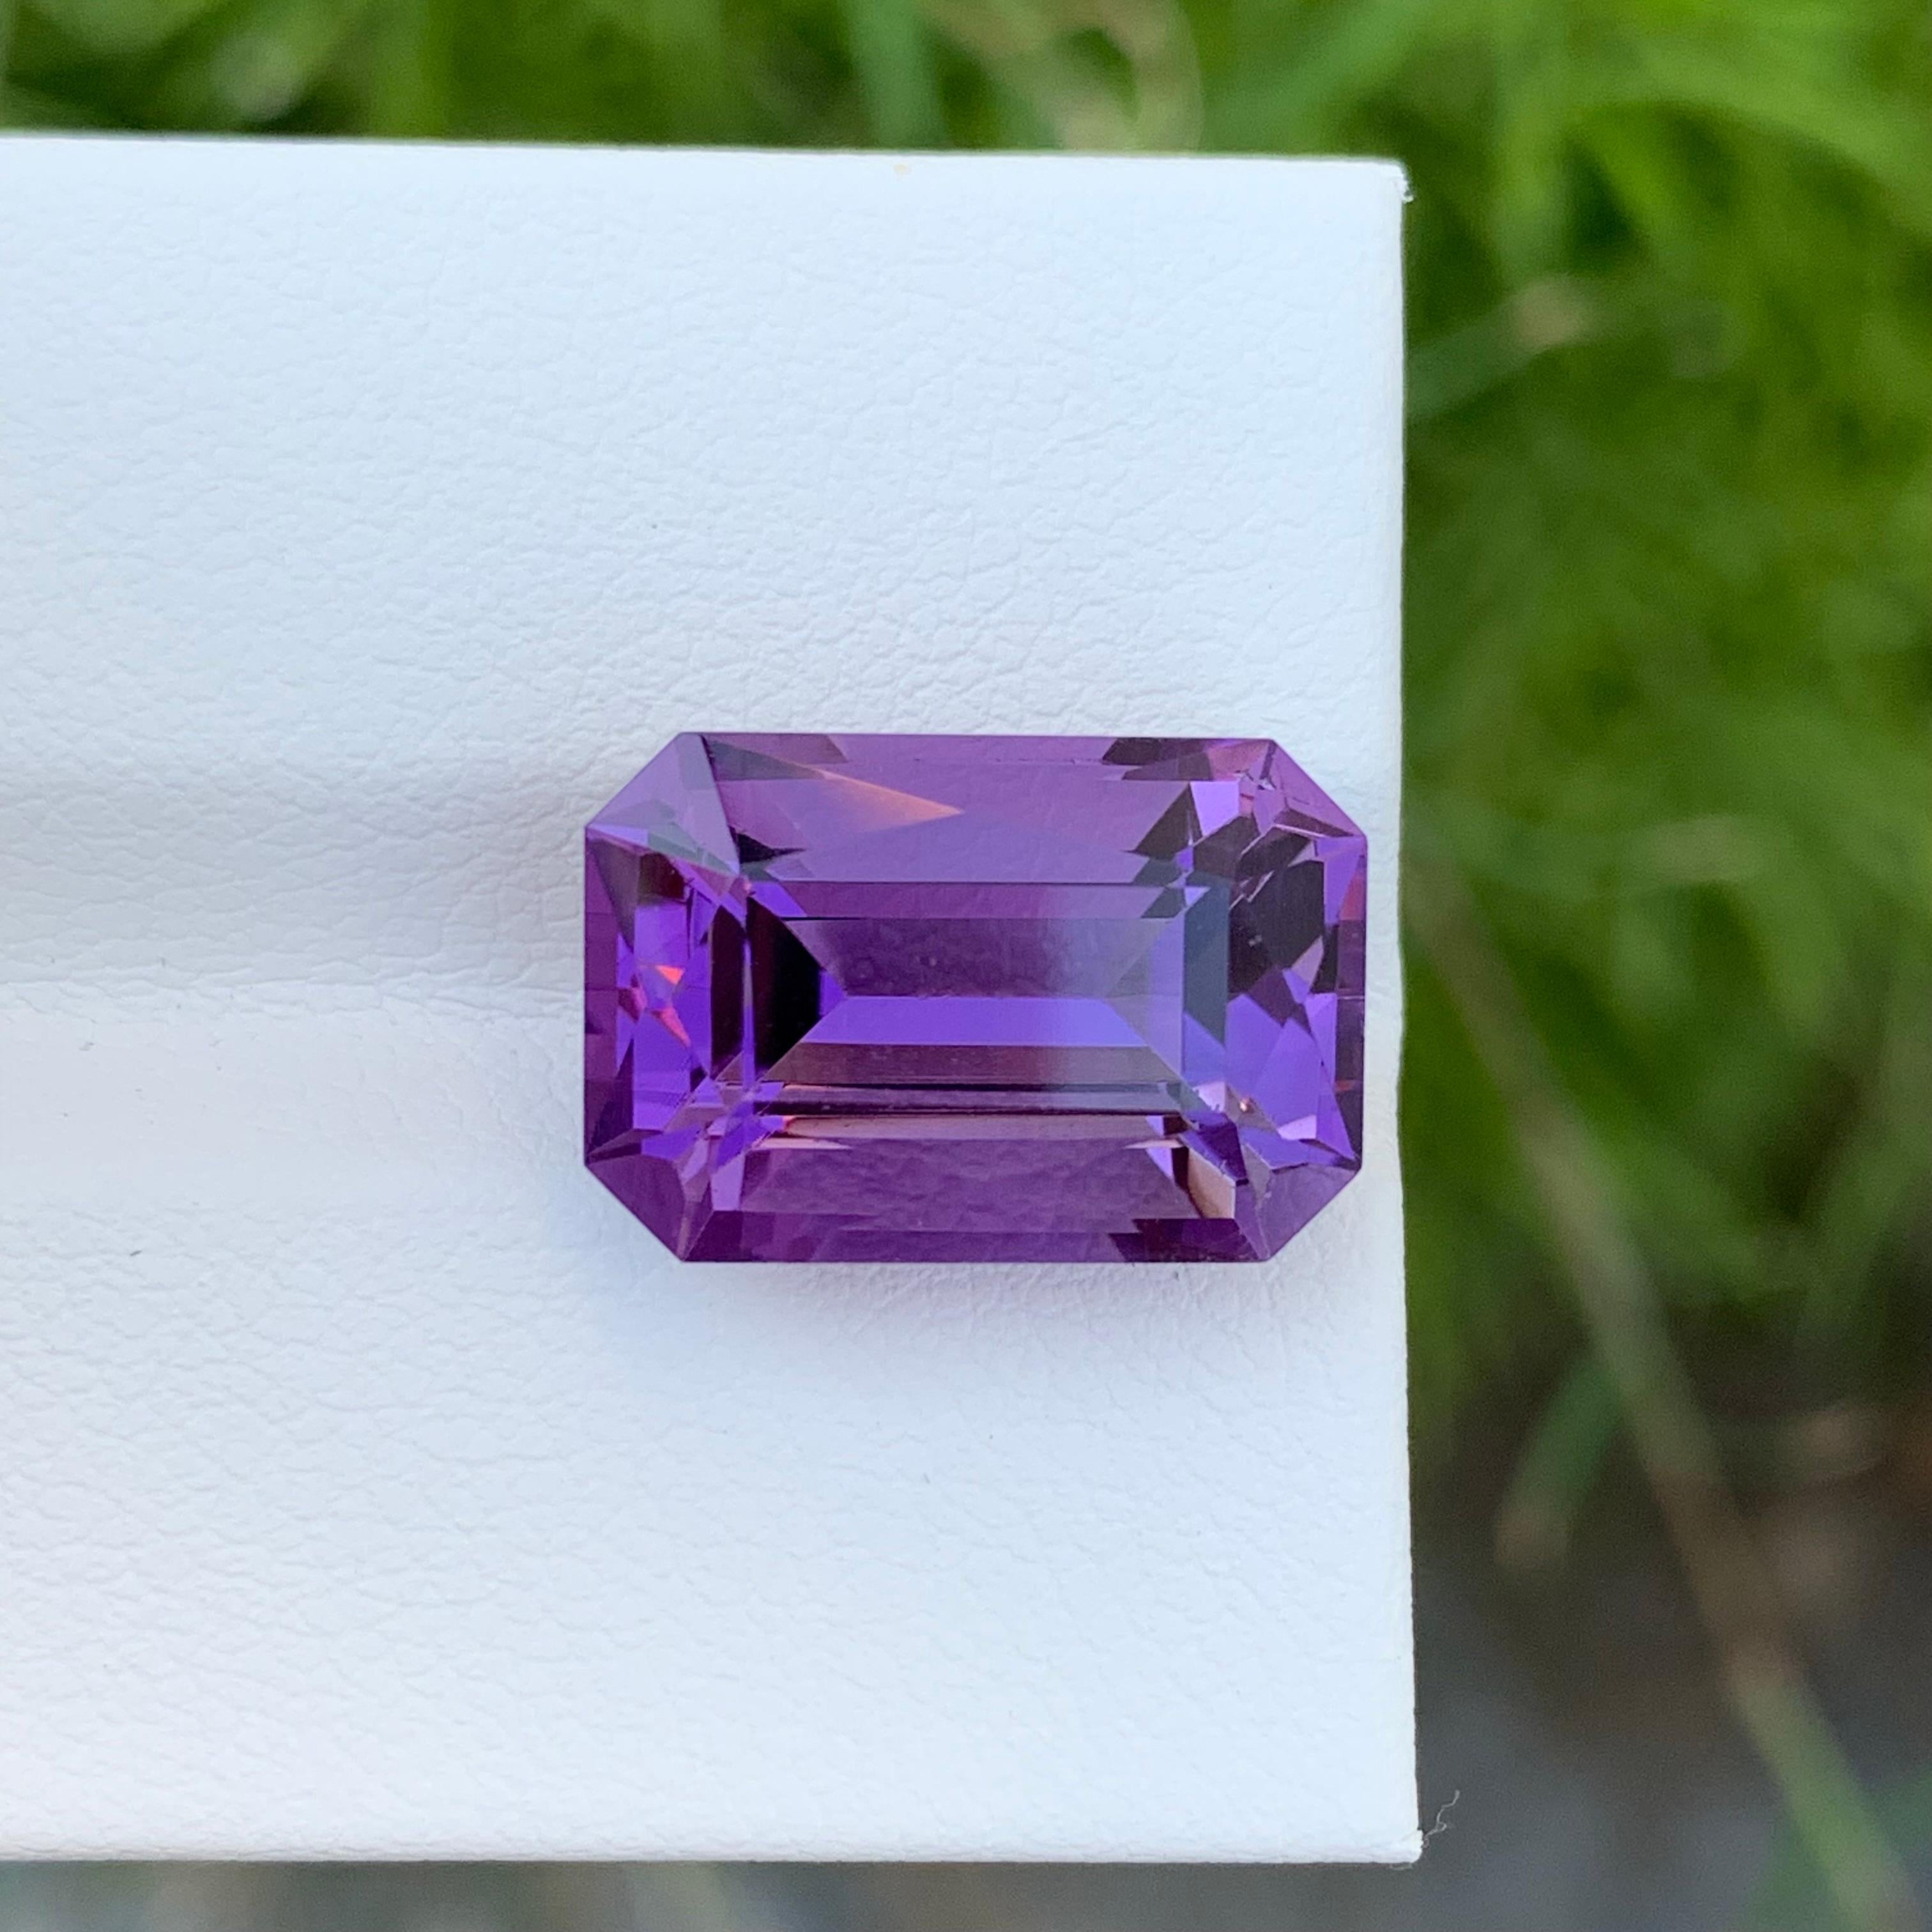 Loose Amethyst
Weight: 9.30 Carats
Dimension: 14.8 x 10 x 8.8 Mm
Colour: Purple
Origin: Brazil
Treatment: Non
Certificate: On Demand
Shape: Emerald 
Amethyst, a stunning variety of quartz known for its mesmerizing purple hue, has captivated humans